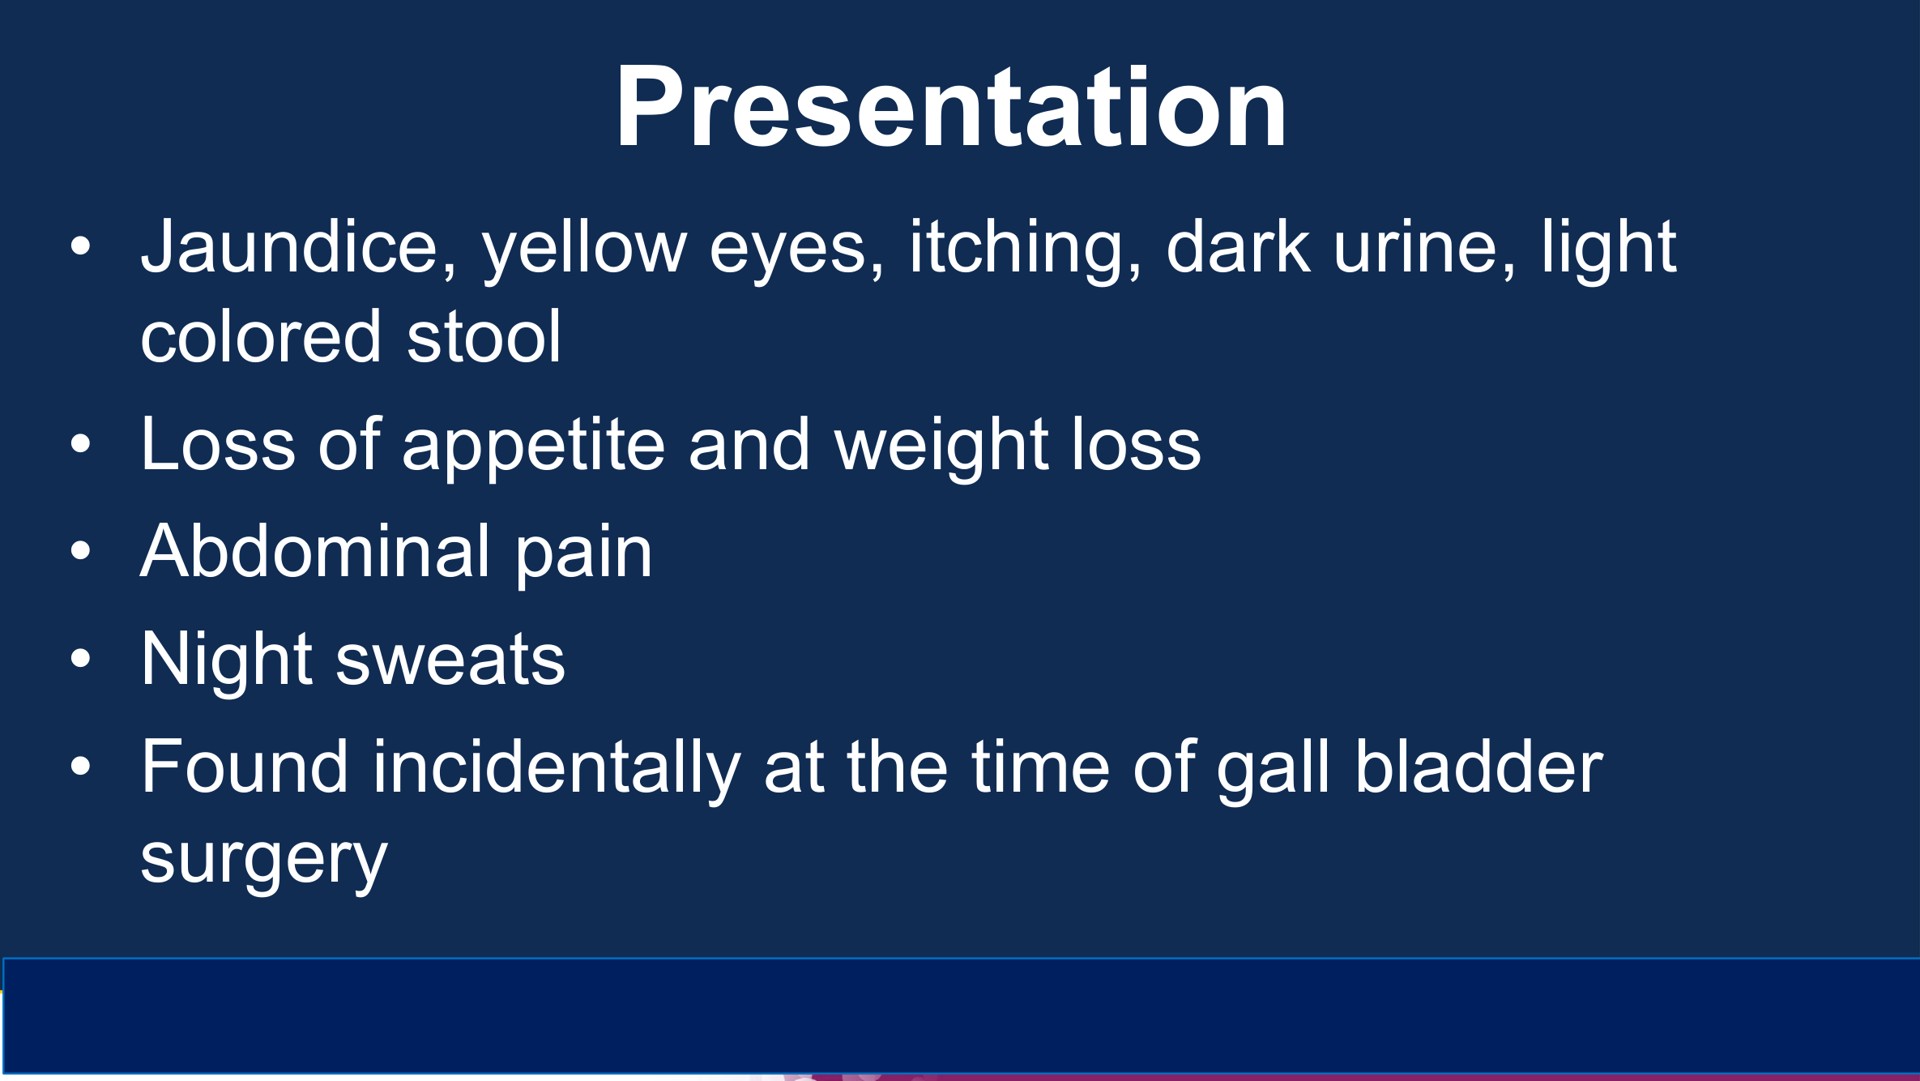 presentation jaundice yellow eyes itching dark urine light colored stool loss of appetite and weight loss abdominal pain night sweats found incidentally at the time of gall bladder surgery | Compass Therapeutics